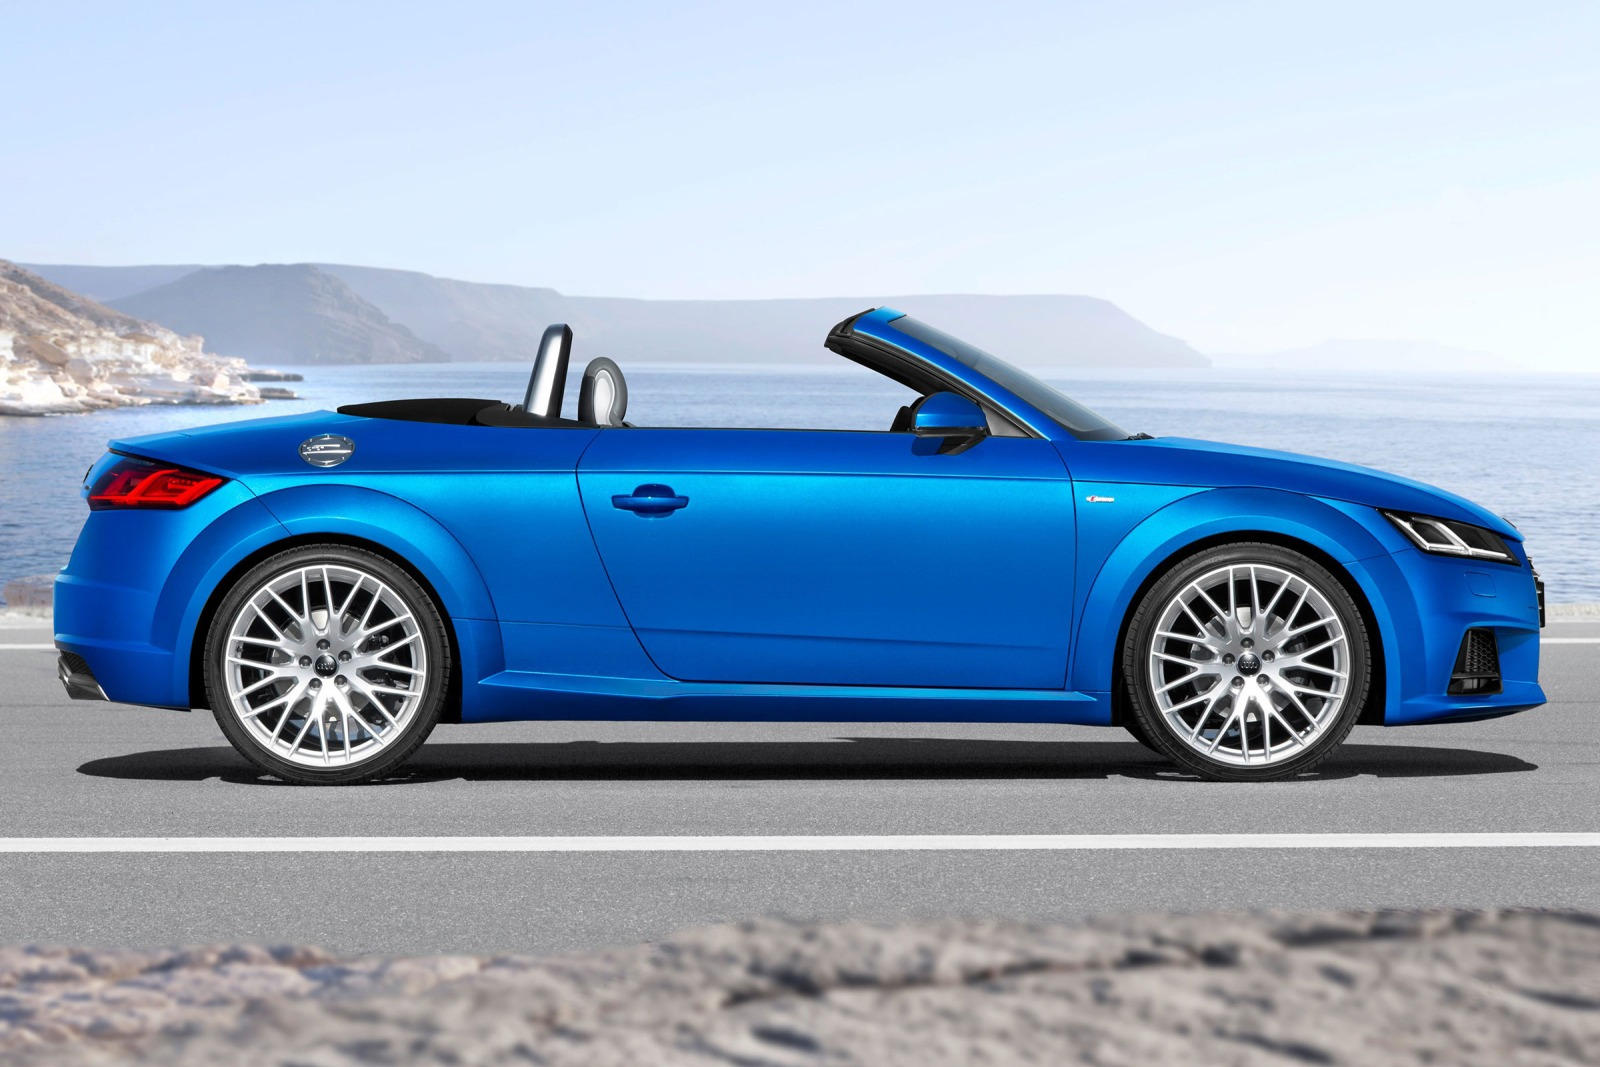 https://cdn.carbuzz.com/gallery-images/2023-audi-tt-roadster-right-side-view-carbuzz-337457-1600.jpg